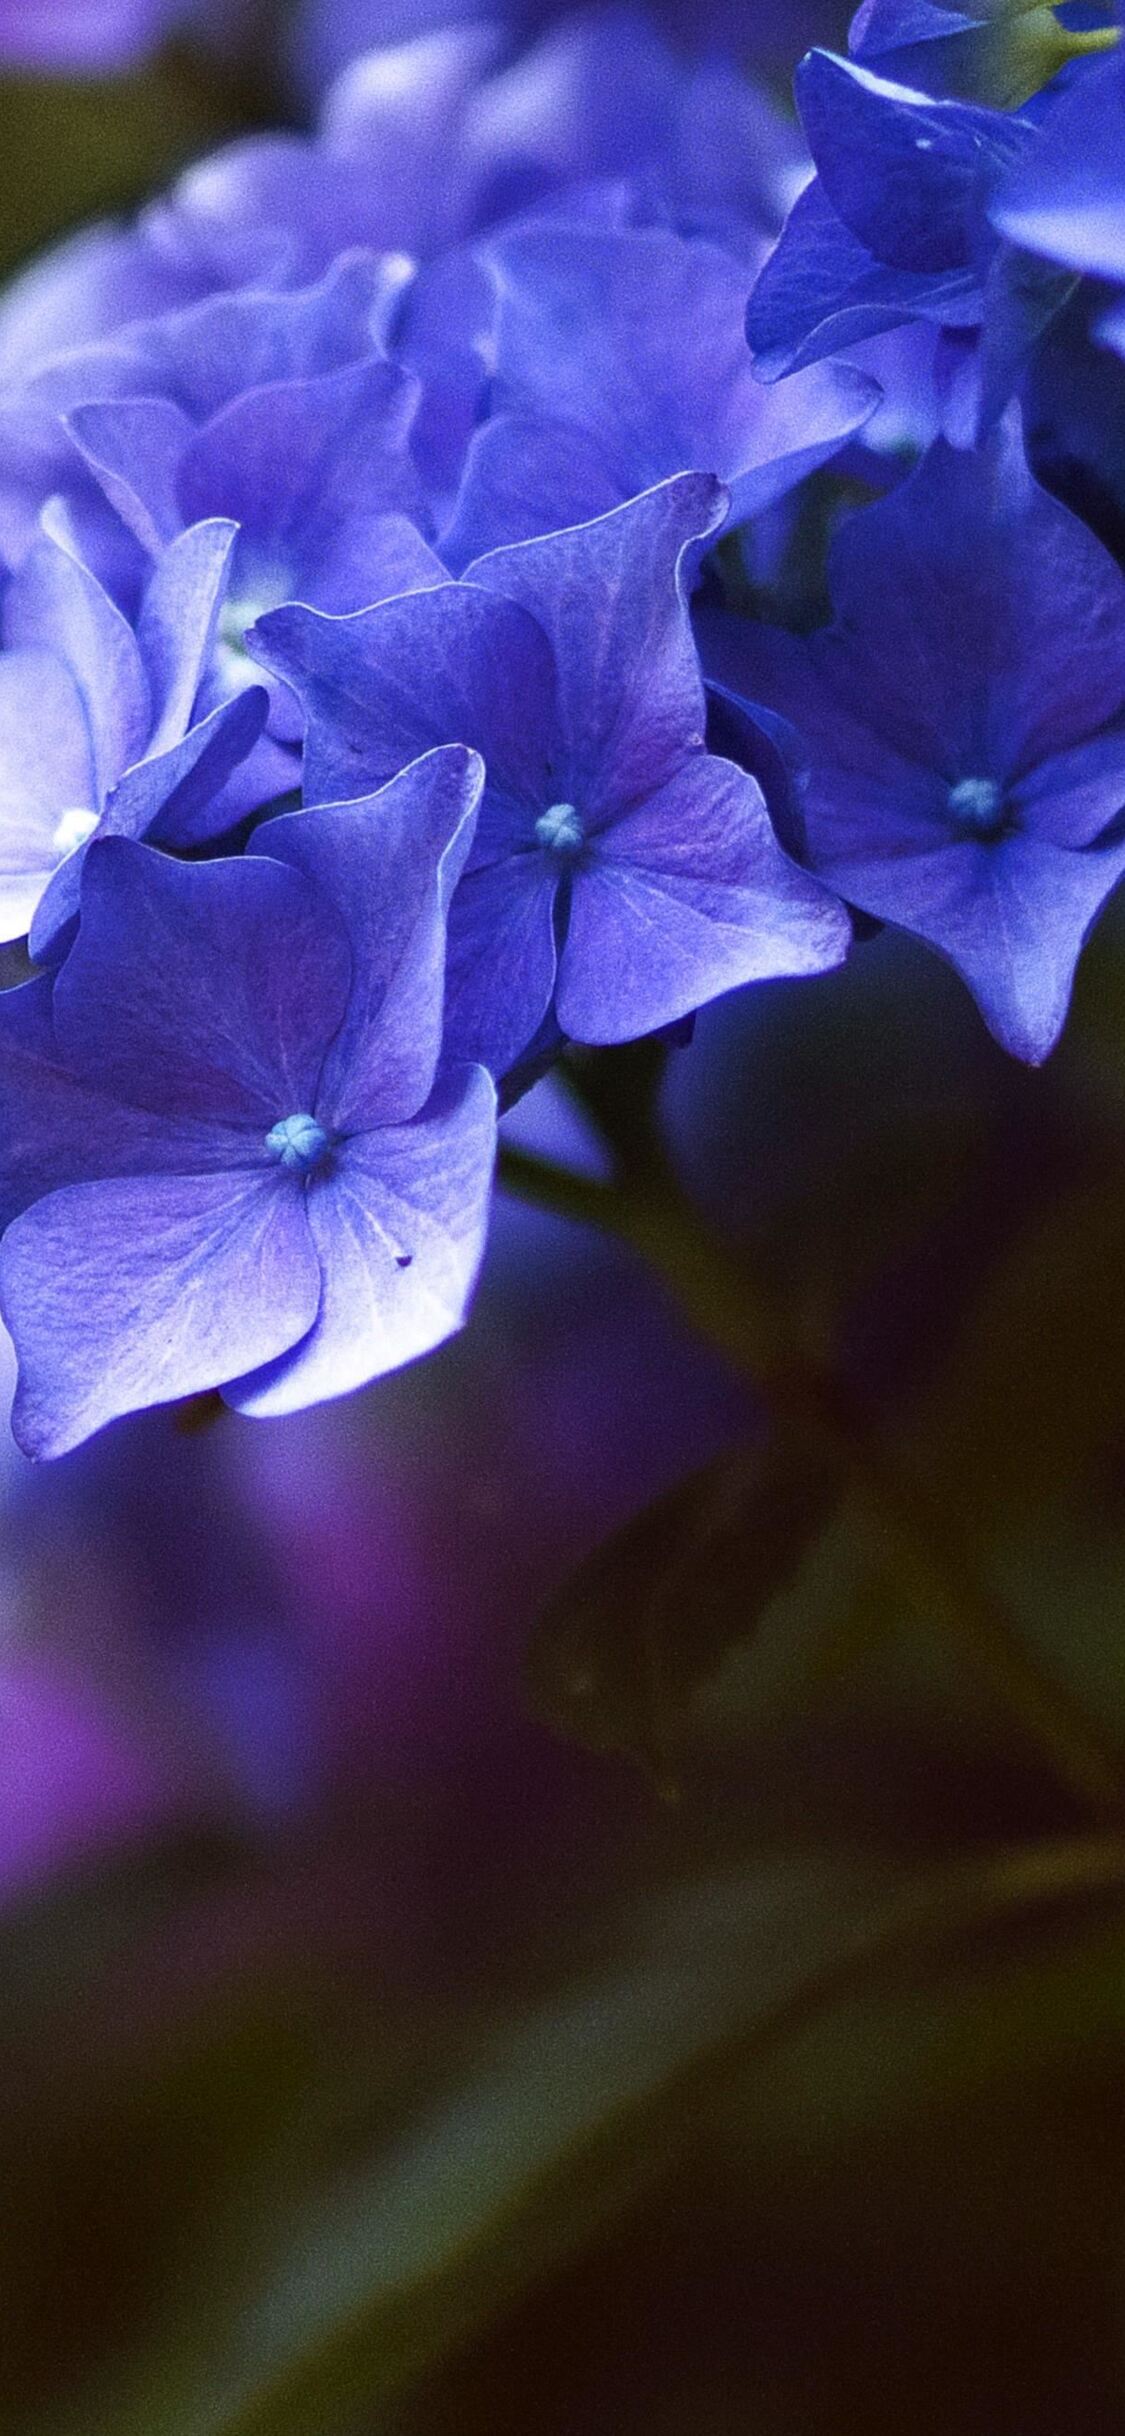 Flower 4k iPhone XS, iPhone iPhone X HD 4k Wallpaper, Image, Background, Photo and Picture